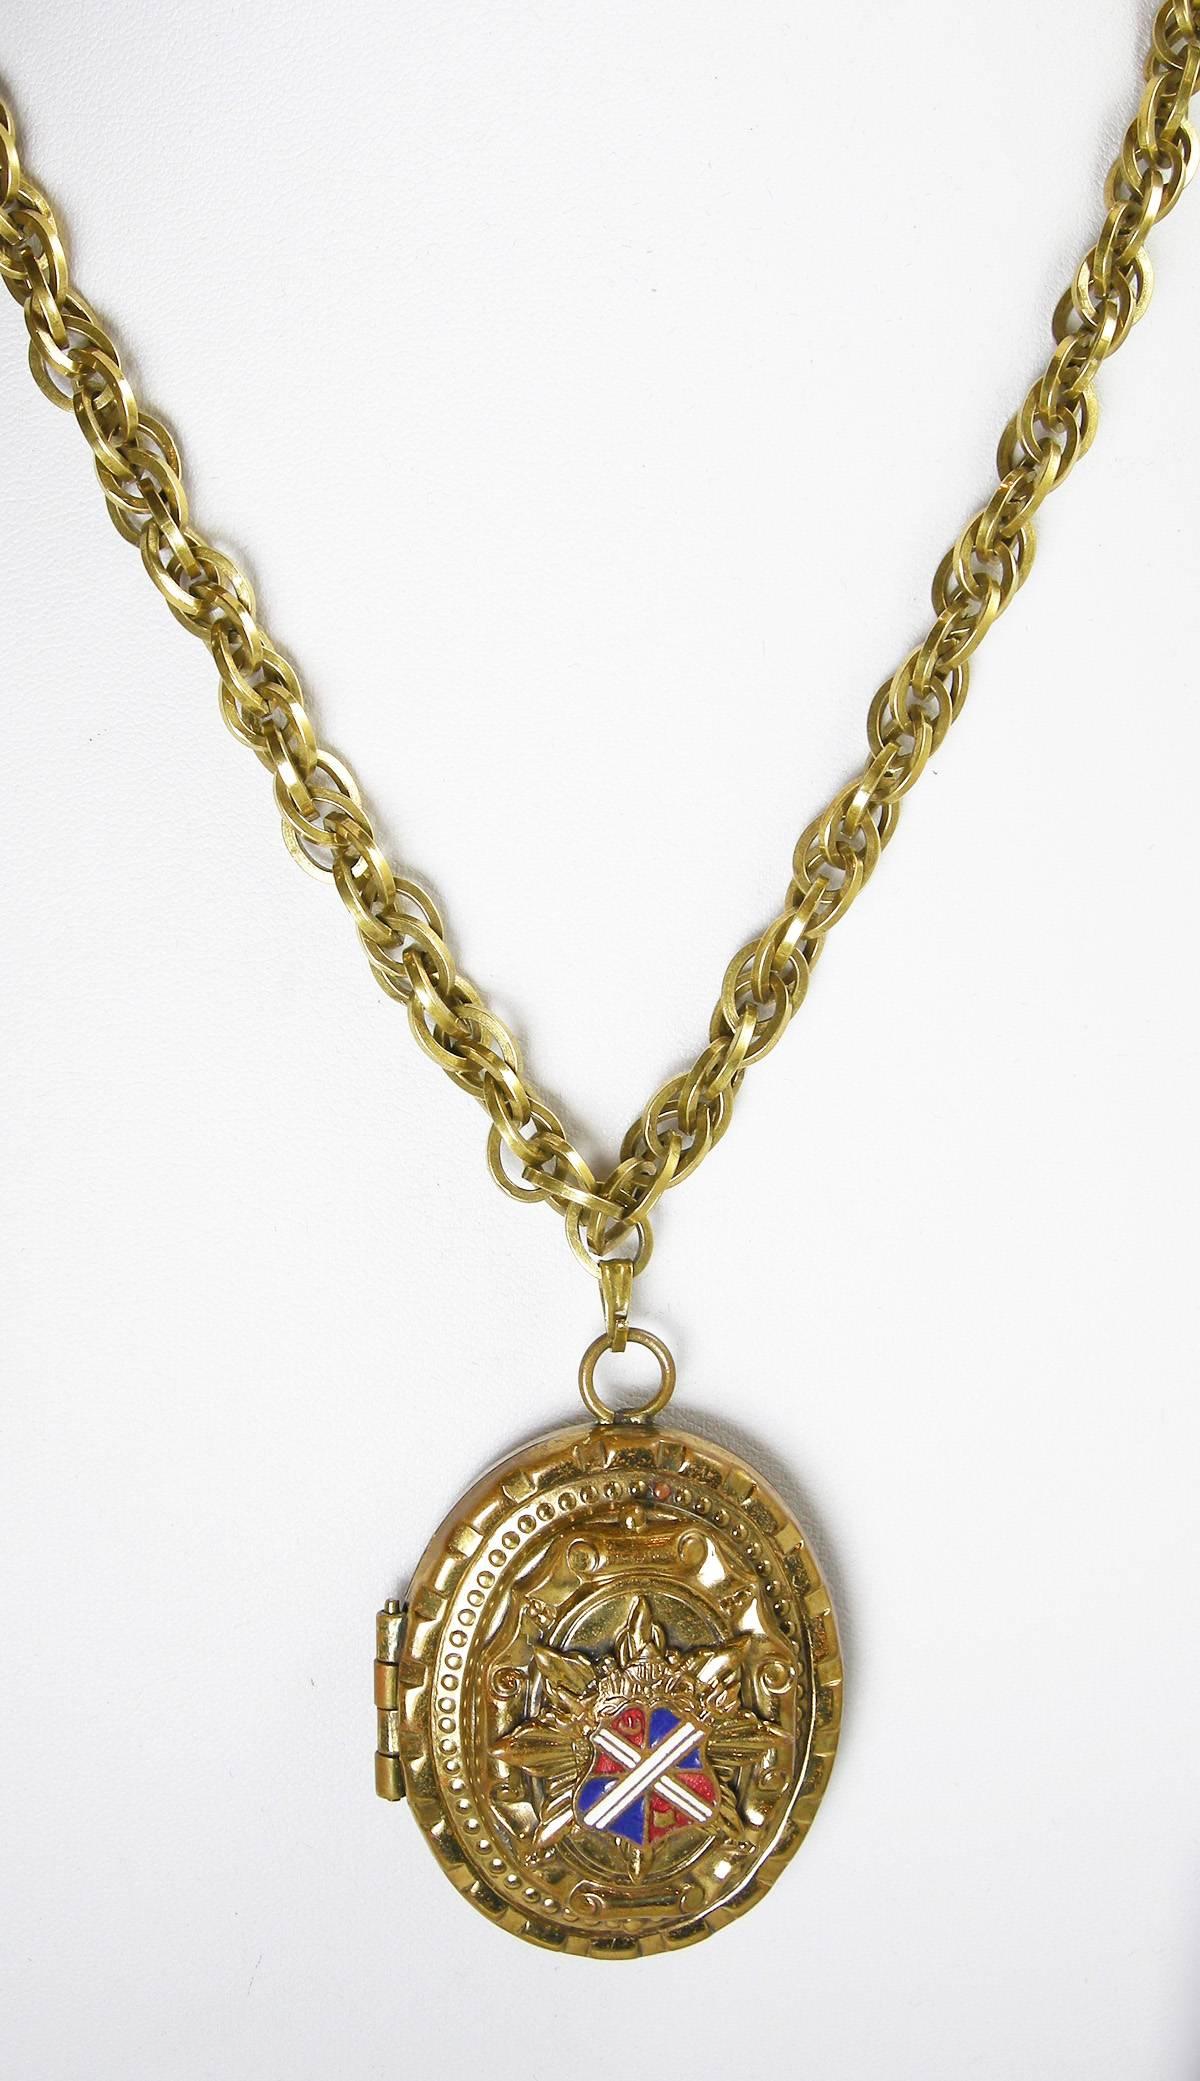 This vintage necklace features a locket, which opens to hold two photos.  The front has a royal shield with red, white and blue enameling on a heavily carved gold-tone setting.  The locket measures 2” x 1-1/2” and the double-link chain is 18-1/2” x